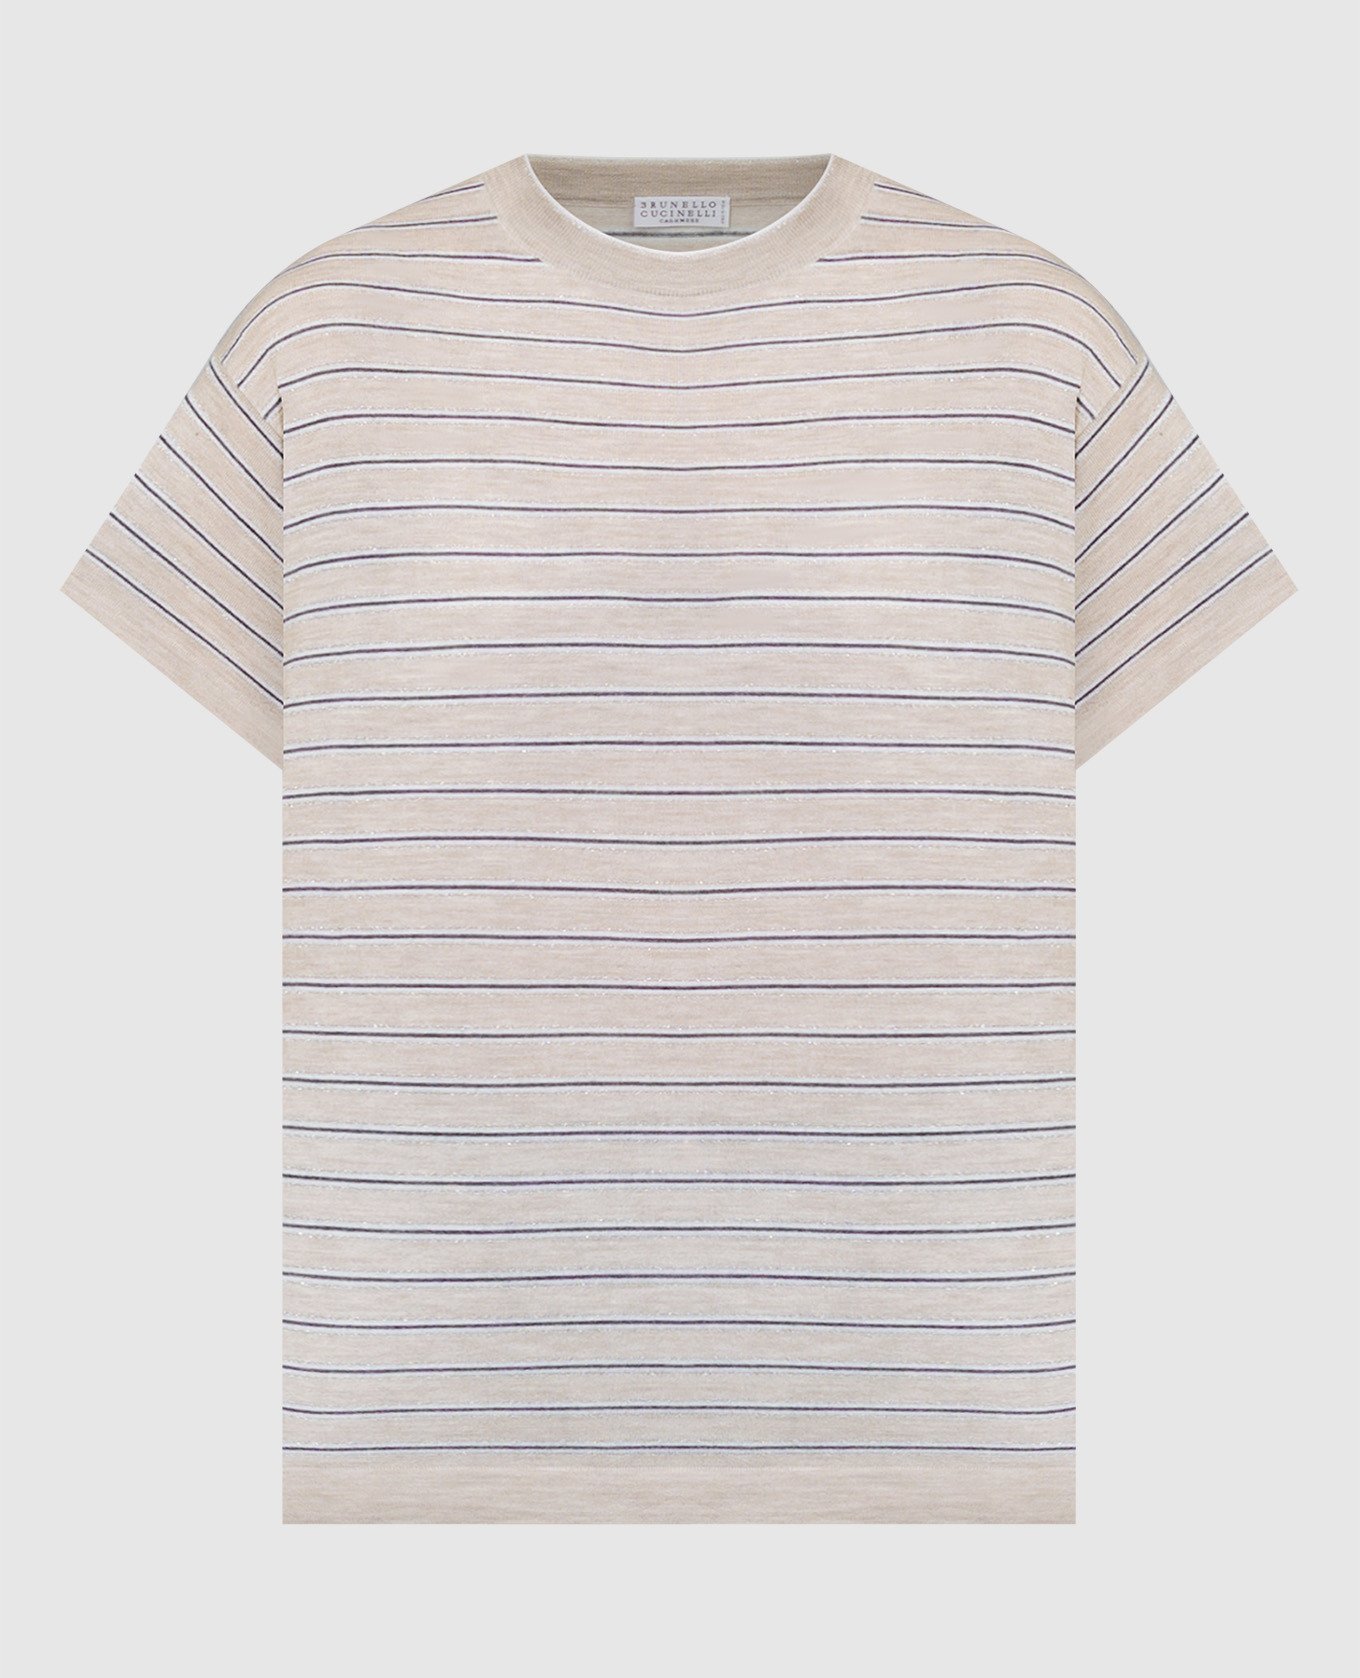 Beige t-shirt made of wool and cashmere with lurex